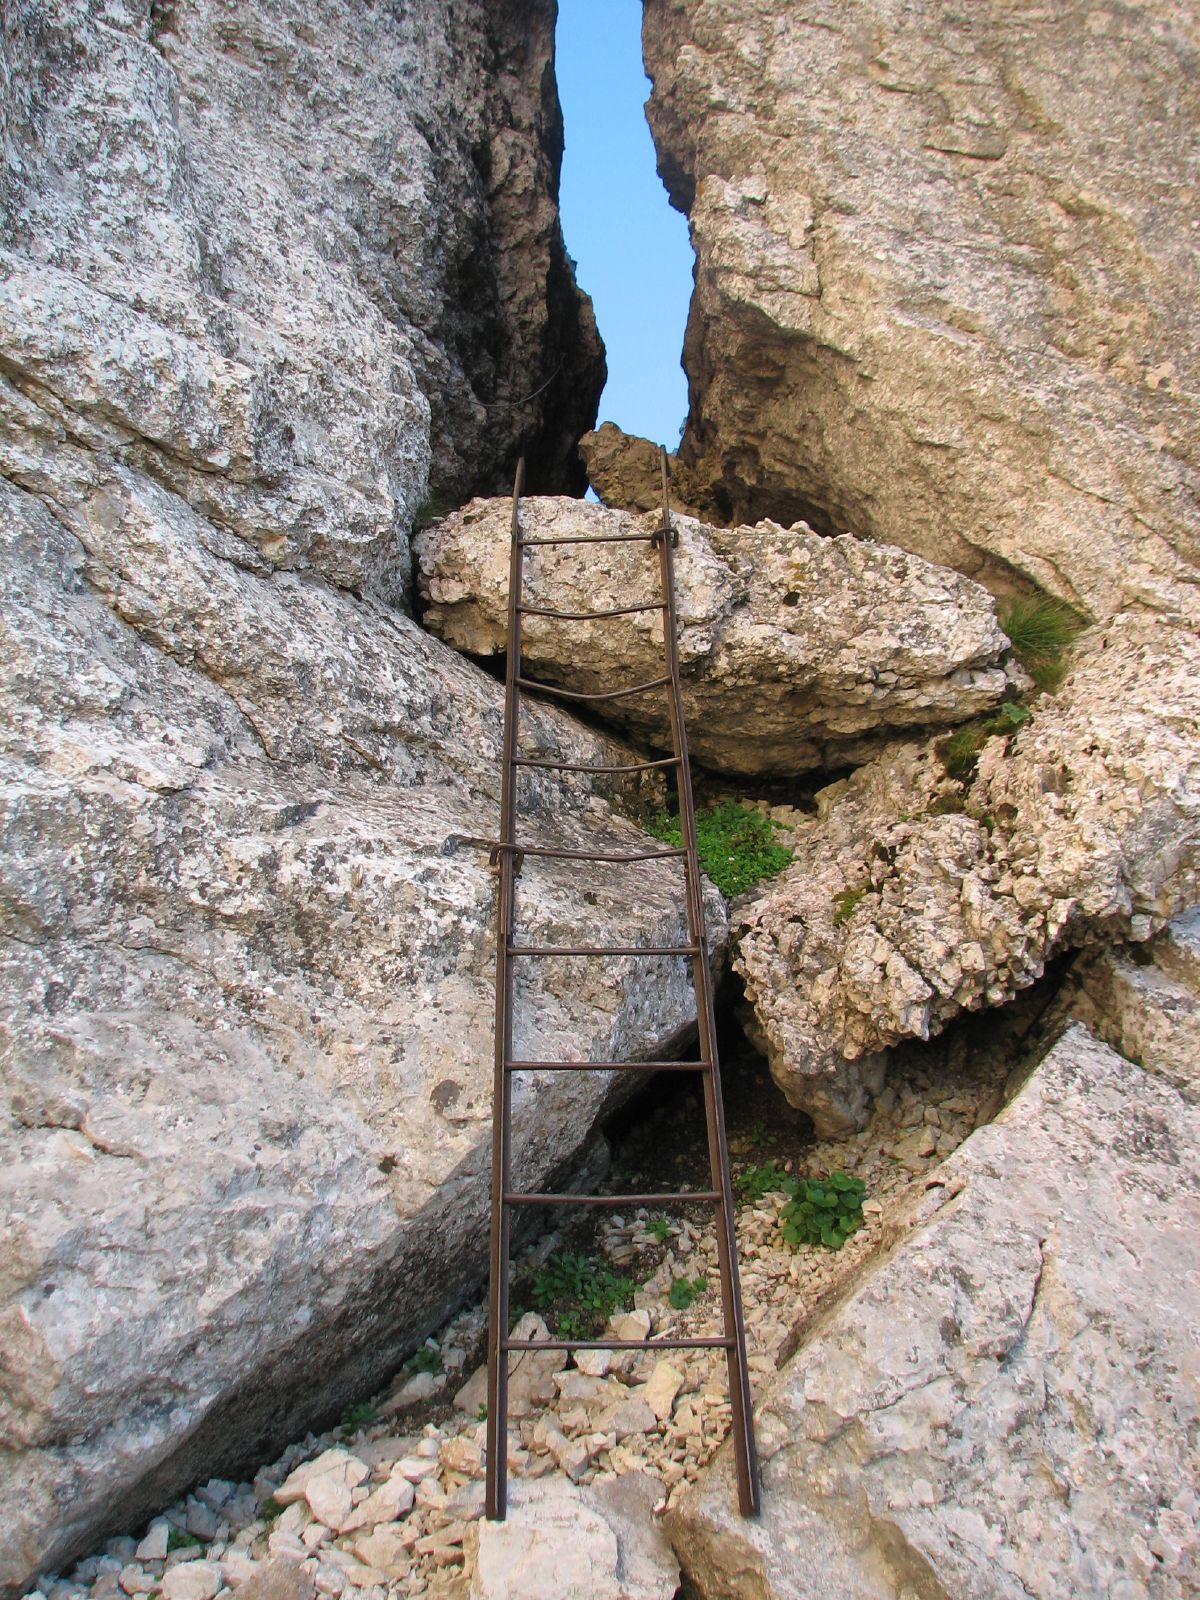 there is a ladder leading up into the rocks